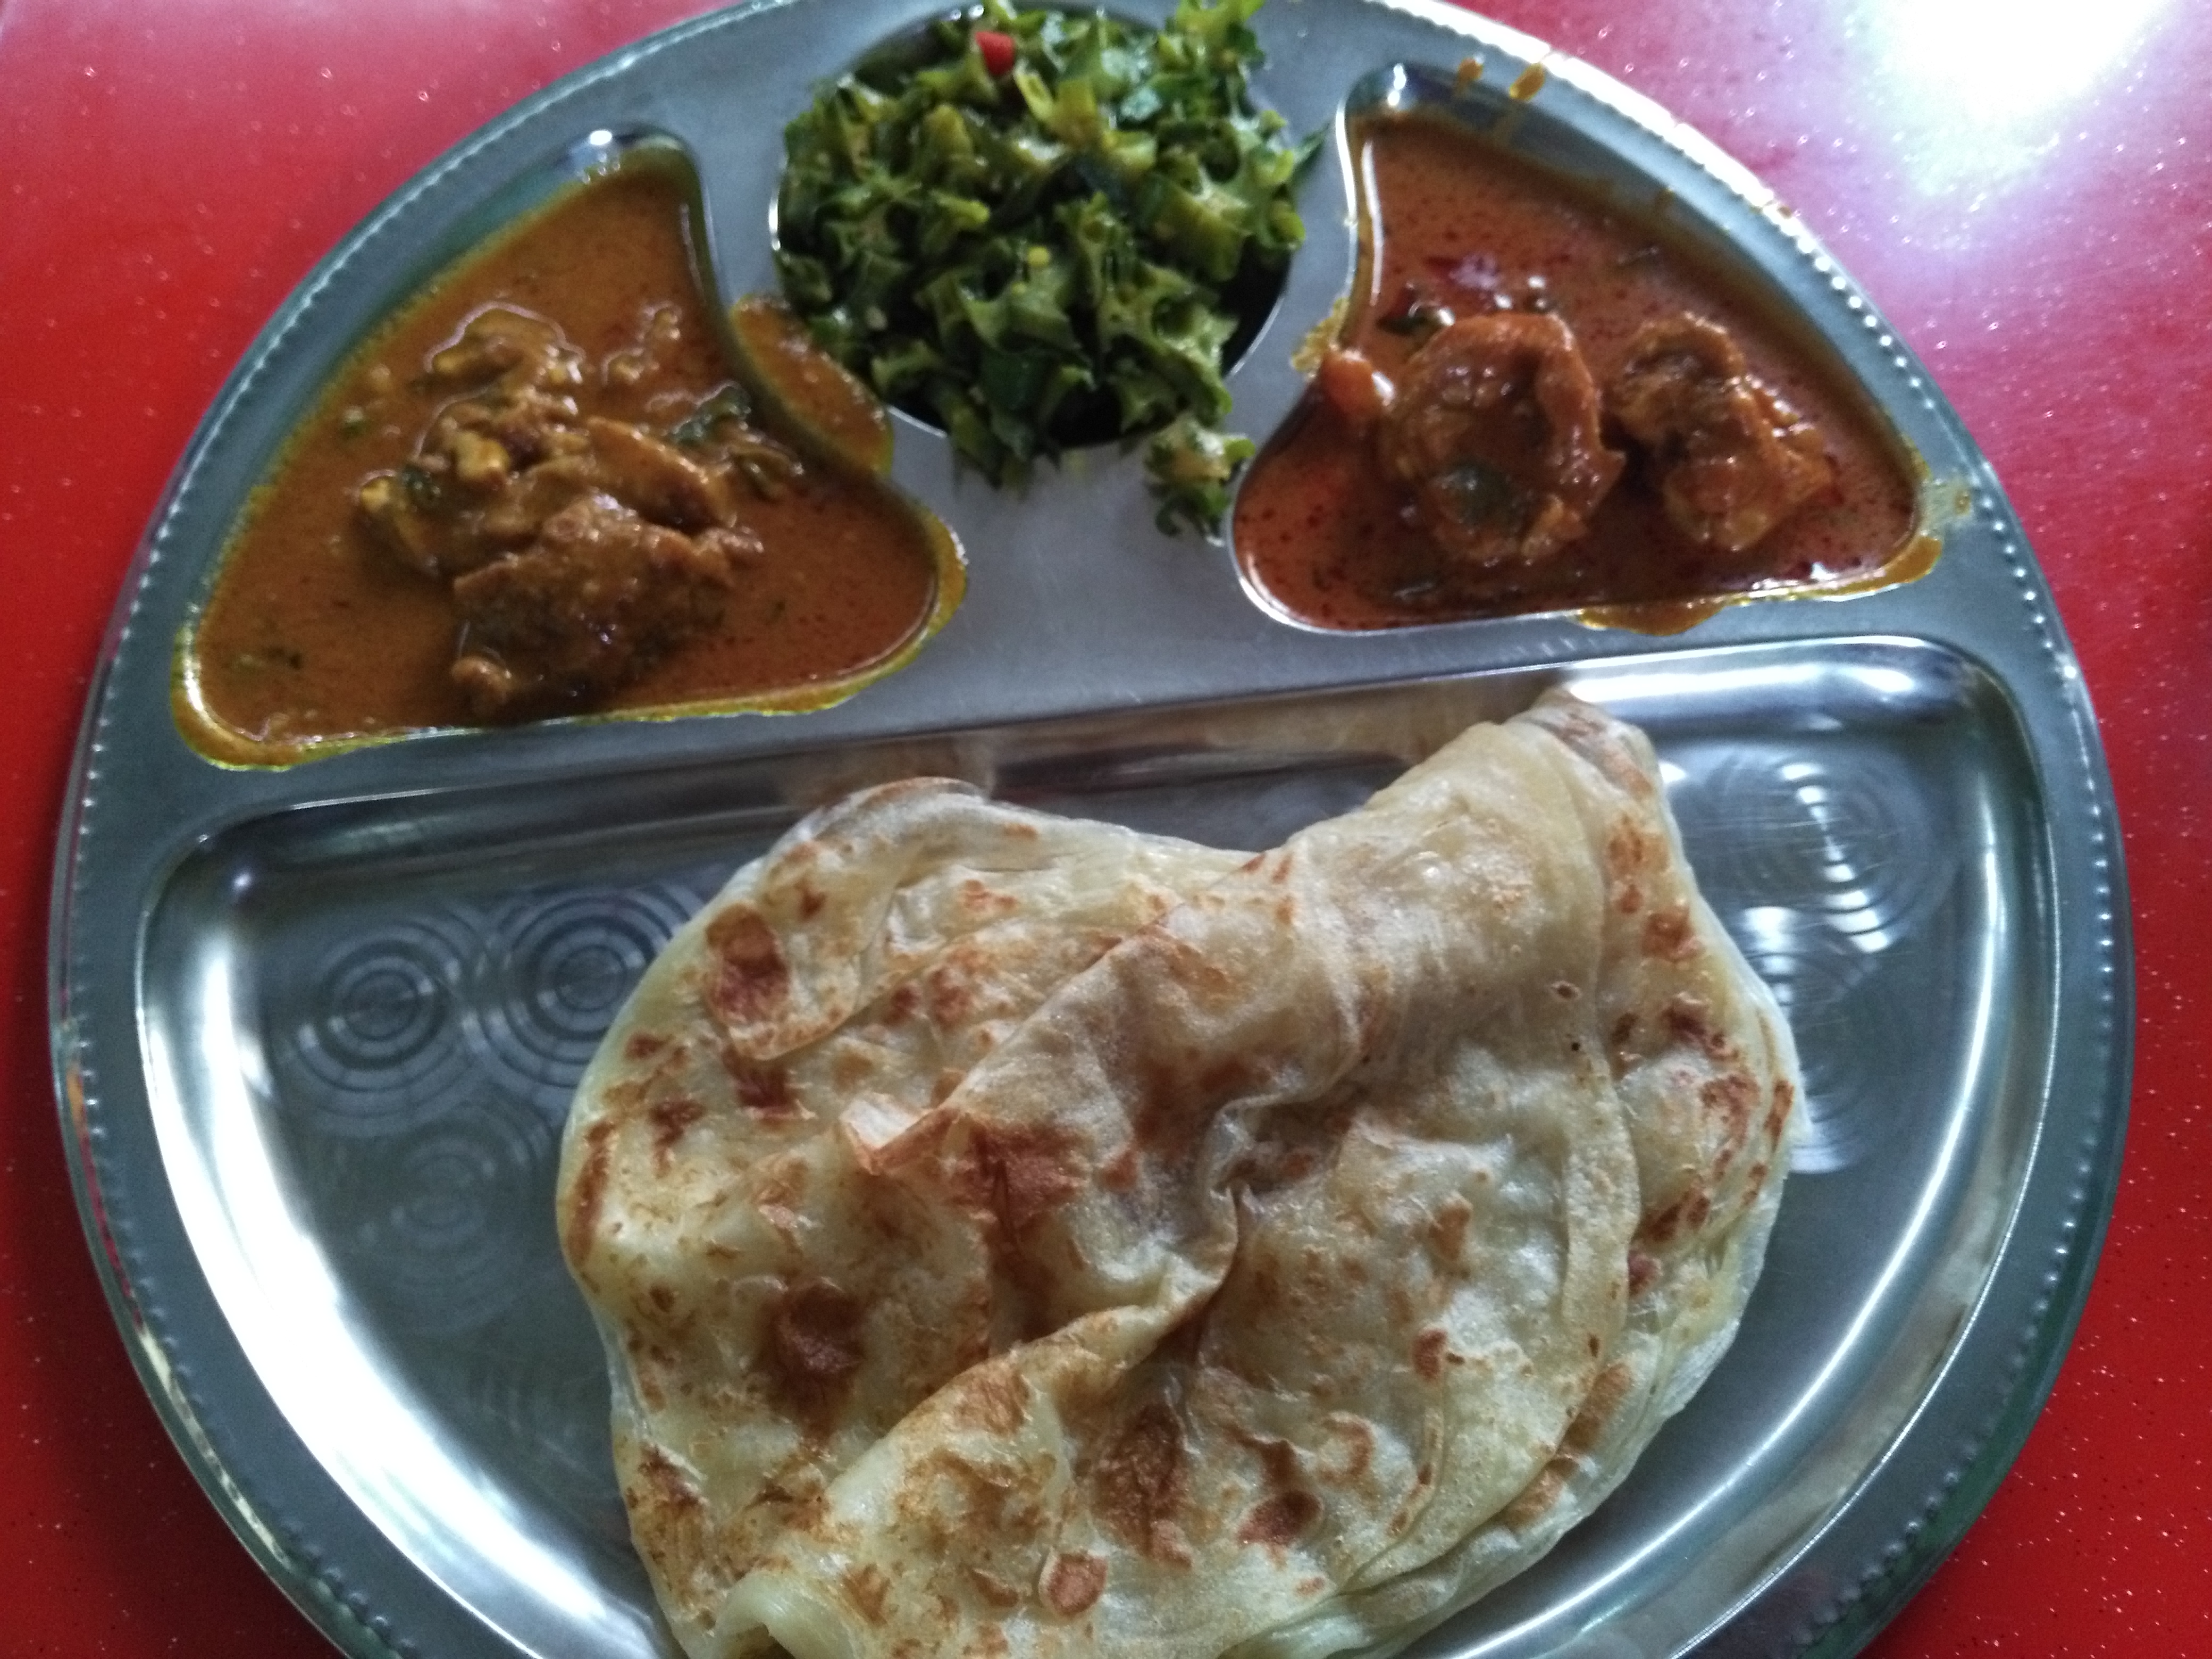 Roti chennai (aka. paratha) with beef curry, chicken curry, and stir fried okra.